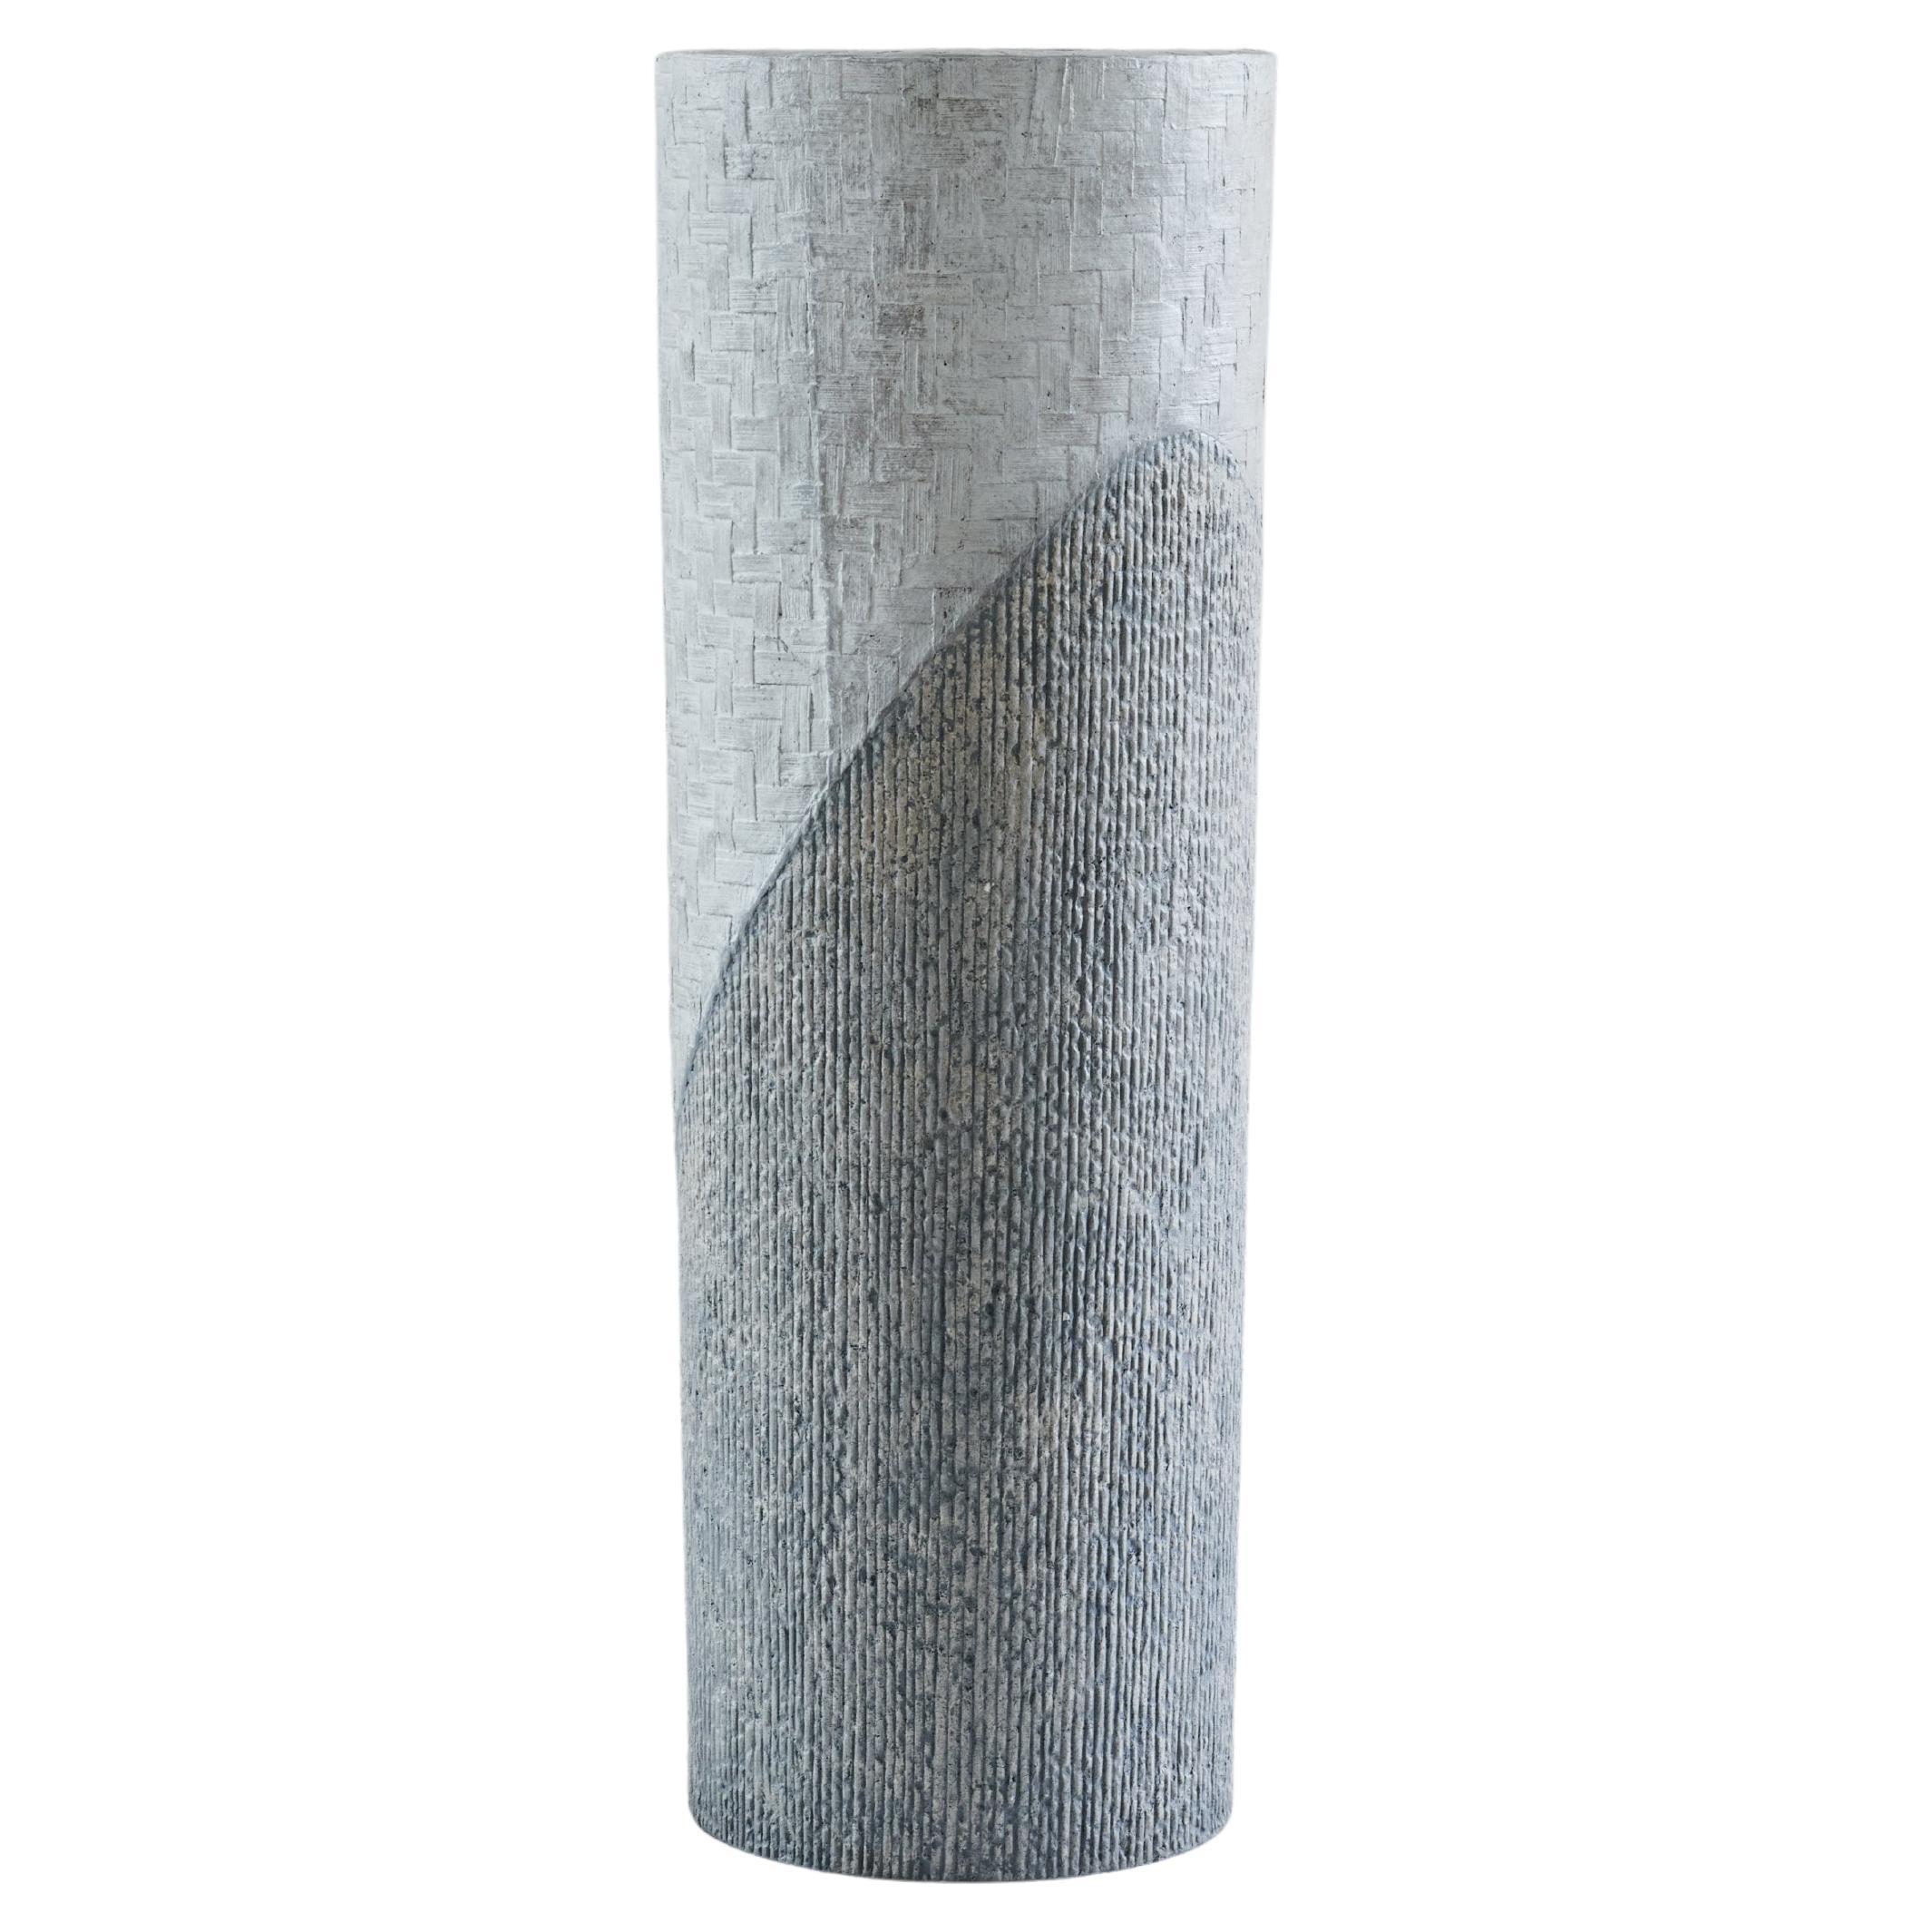 Tall White & Gray Crushed Limestone & Paper Composite Vessel by Studio Laurence